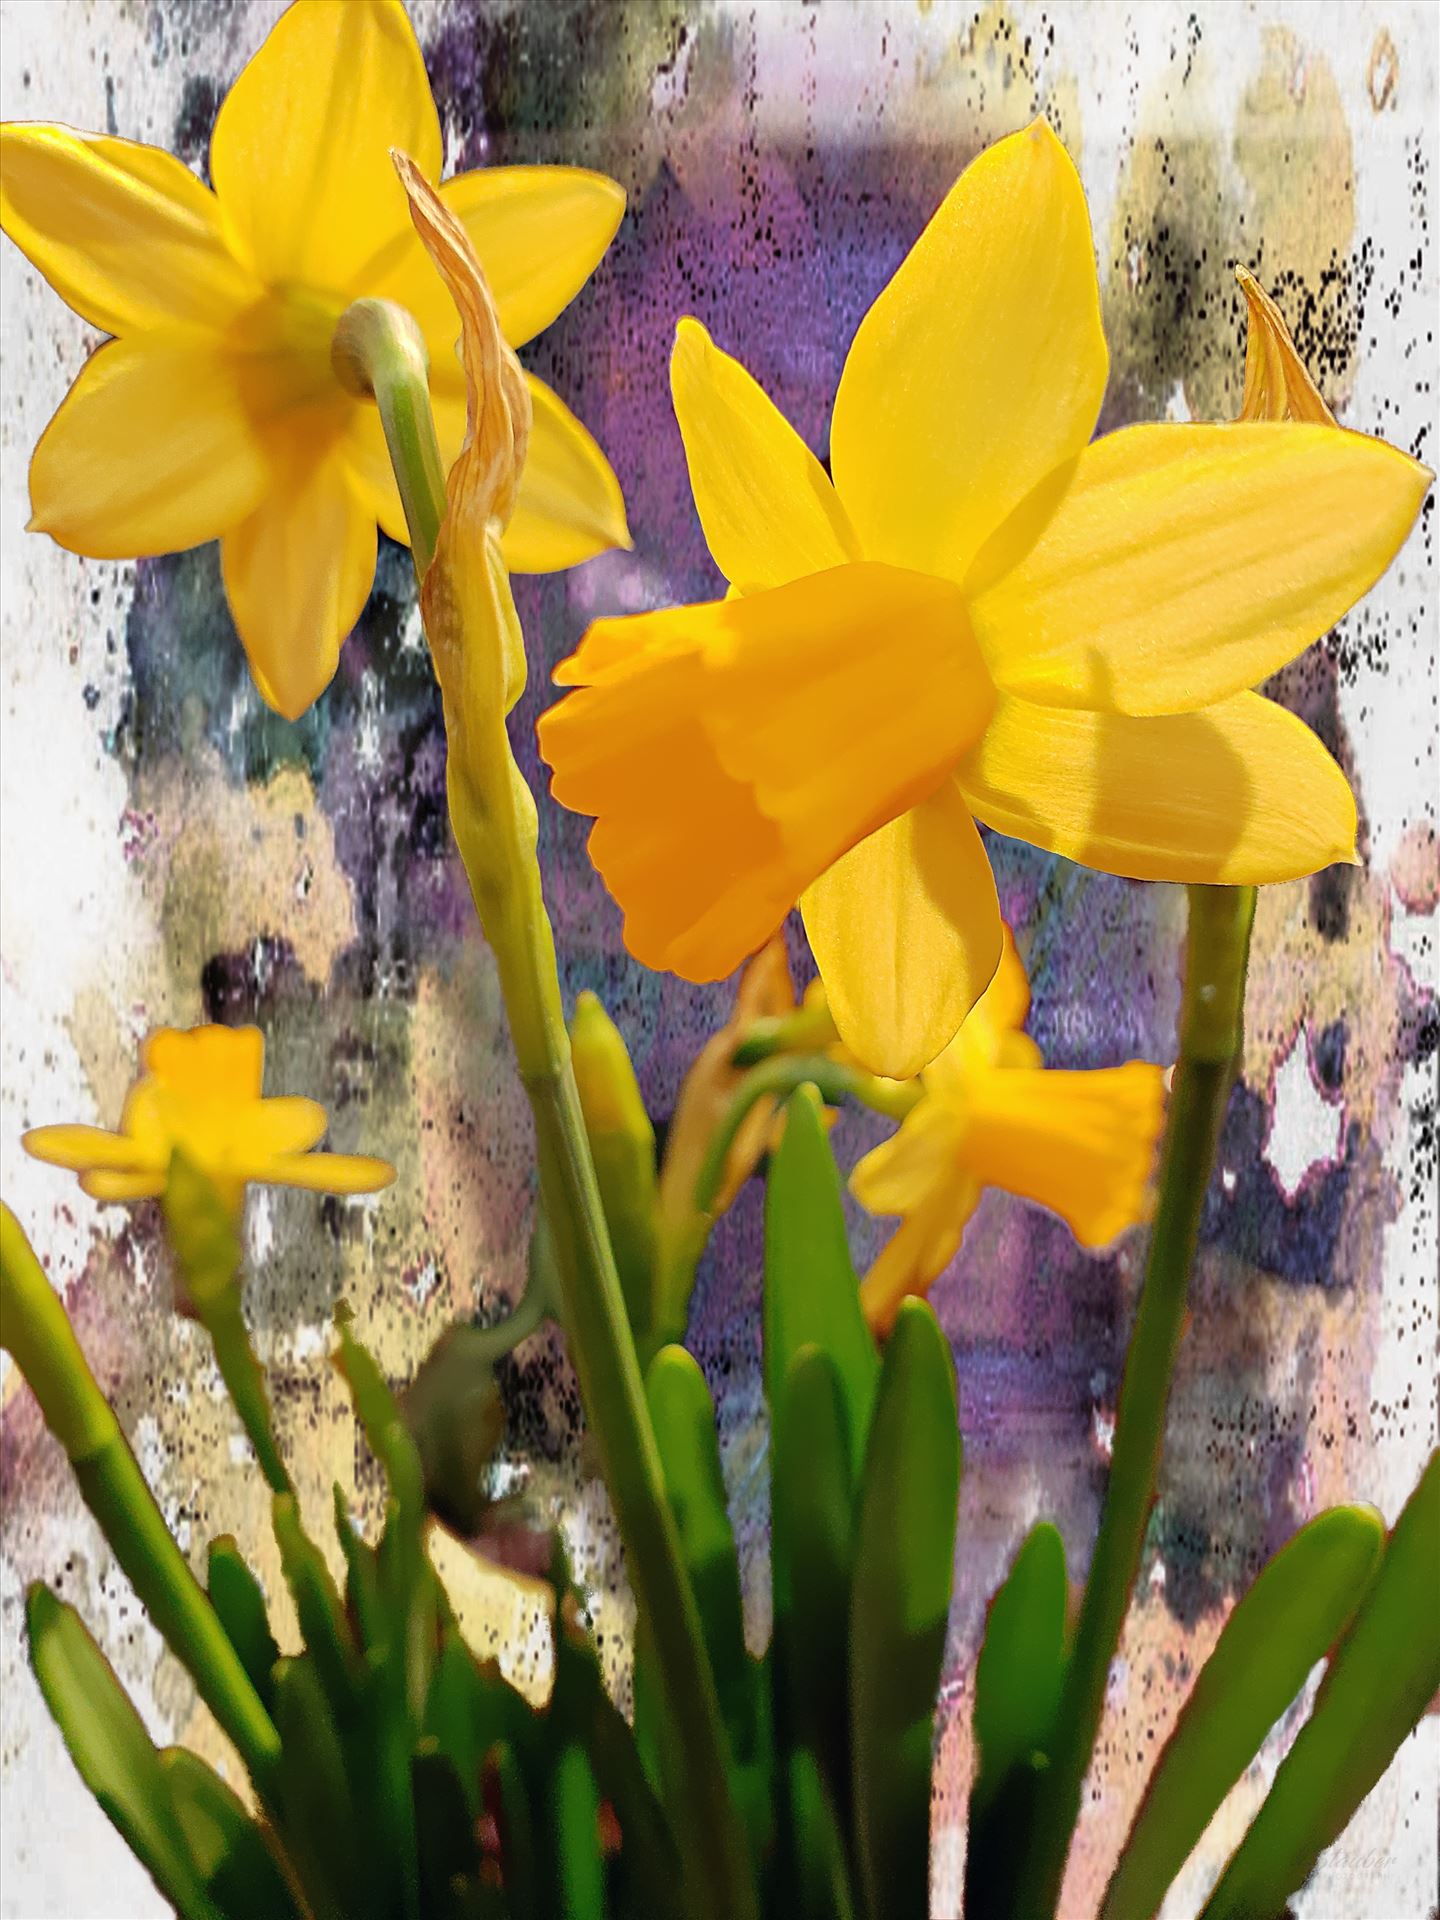 Daffodils  by CLStauber Photography